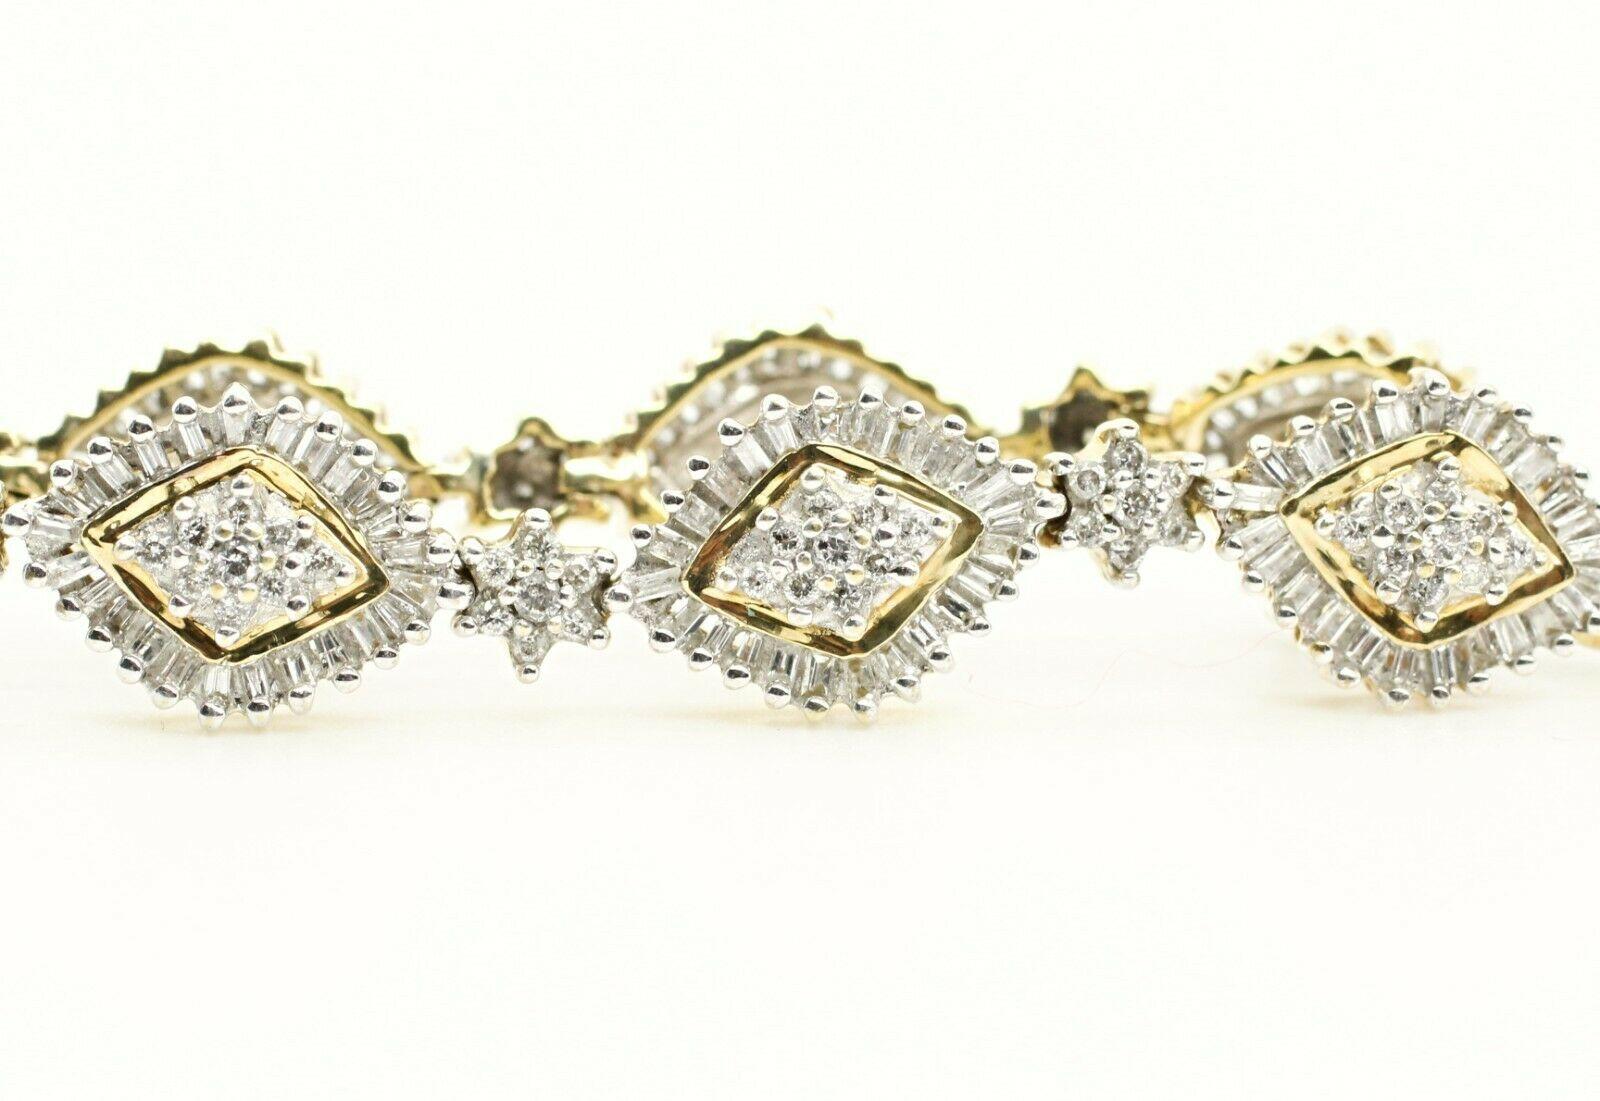  Specifications:
    MAIN stone: 135 PCS ROUND DIAM APPROX 1.35 CTW
    DIAMOND: 24 PCS T-BAGUETTE 1.15 CTW
    CARAT TOTAL WEIGHT: APPROX 2.50 CTW
    COLOR/clarity: G/ SI1
    brand: UNBRANDED
    metal: 10K YELLOW GOLD
    type: BRACELET
   